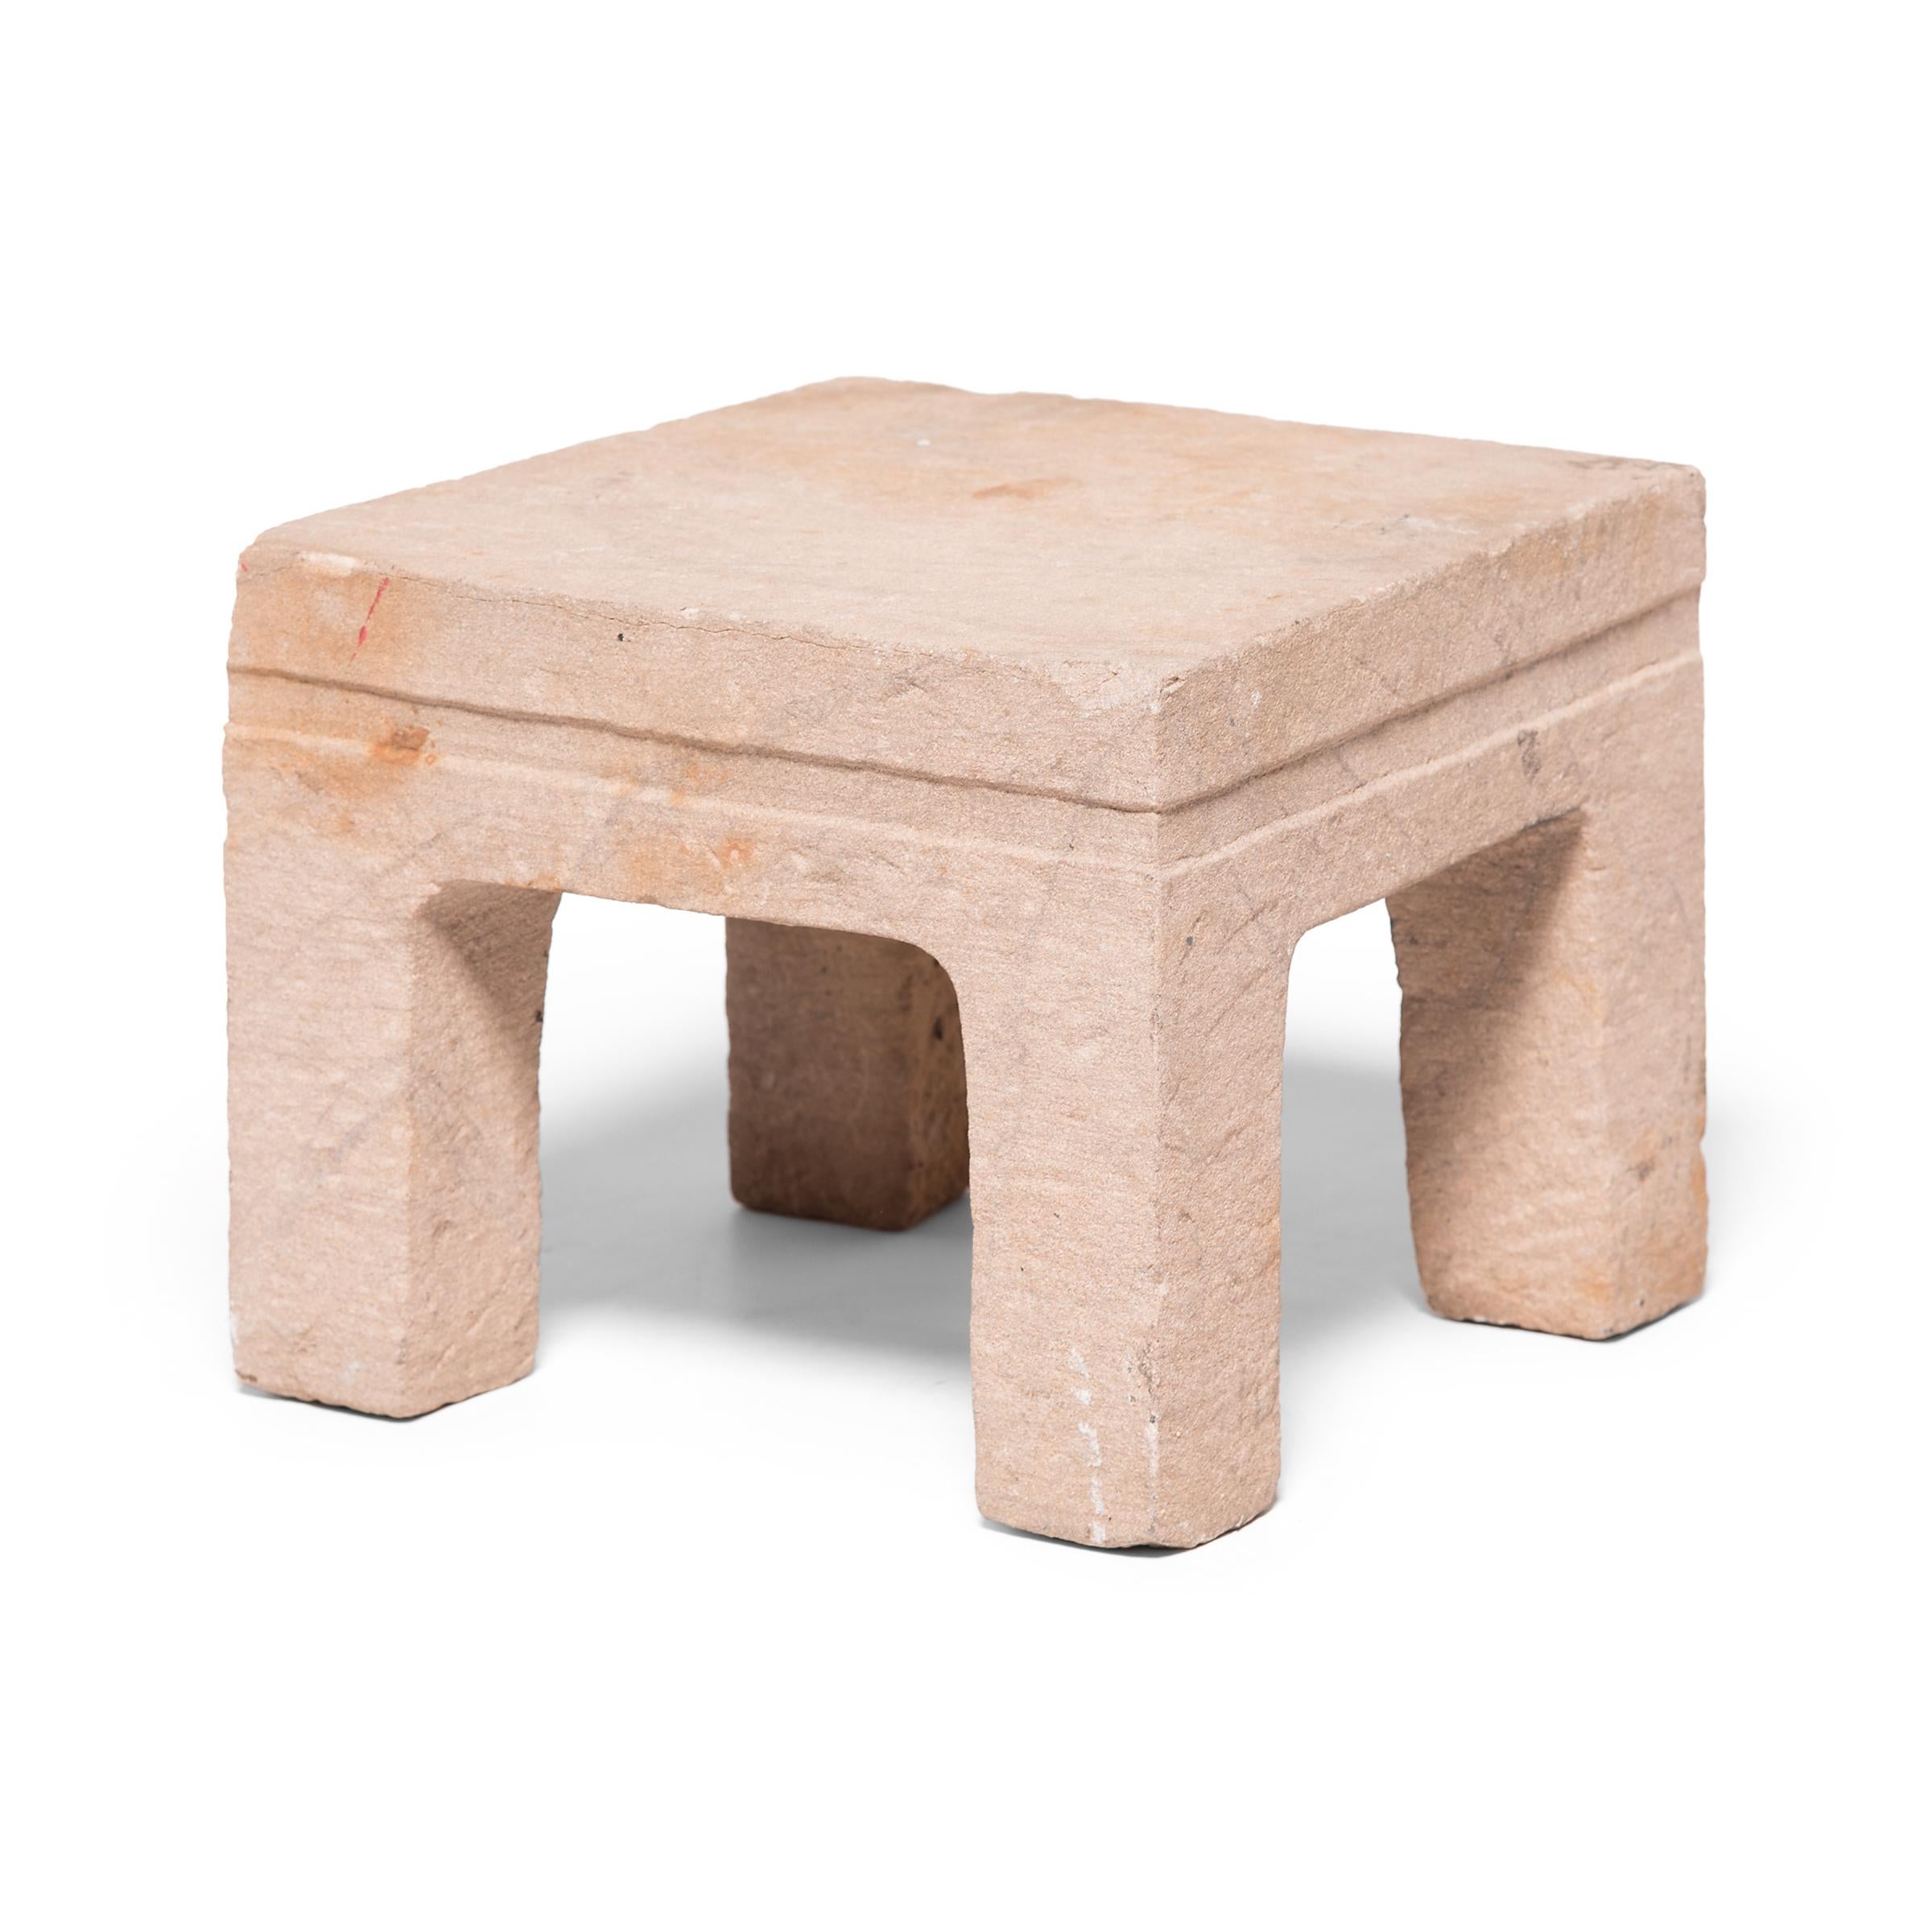 This fang deng, which translates literally to square stool, was hand carved from a solid piece of limestone nearly 250 years ago in northern China. Centuries of use have lent the stone a beautifully worn patina, accentuated by the irregular texture